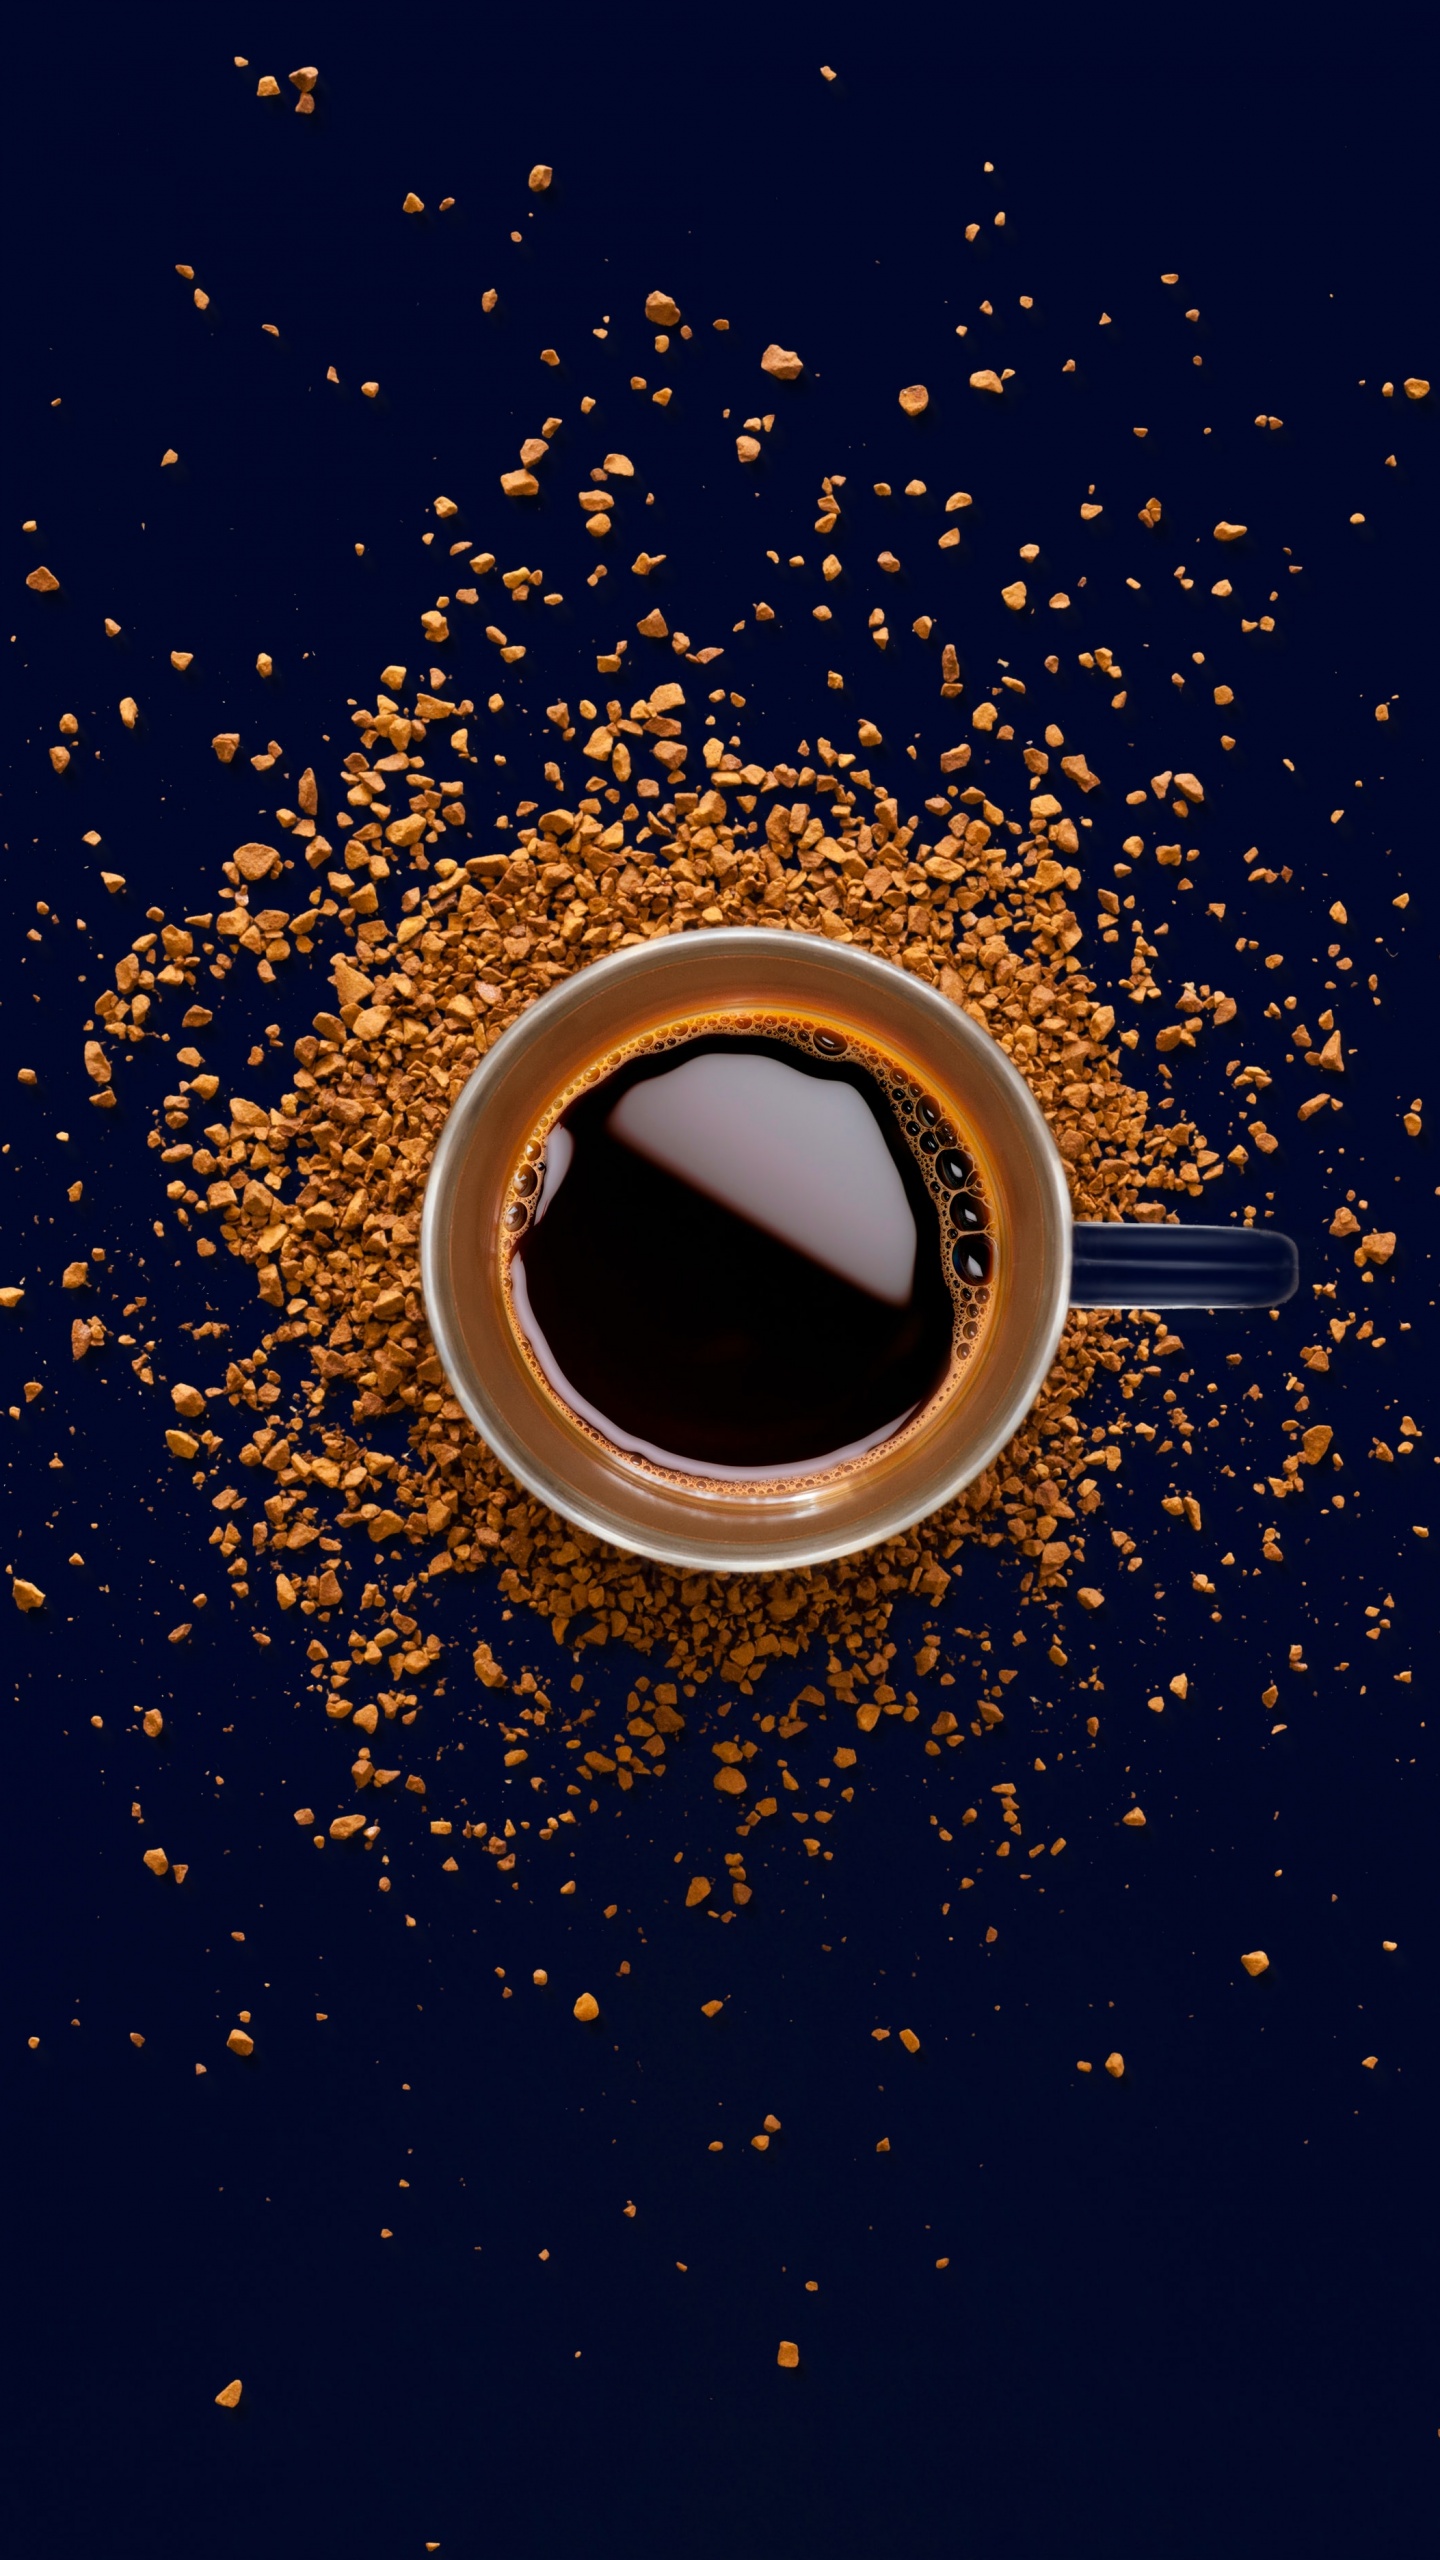 Coffee Wallpaper Images, HD Pictures For Free Vectors Download - Lovepik.com